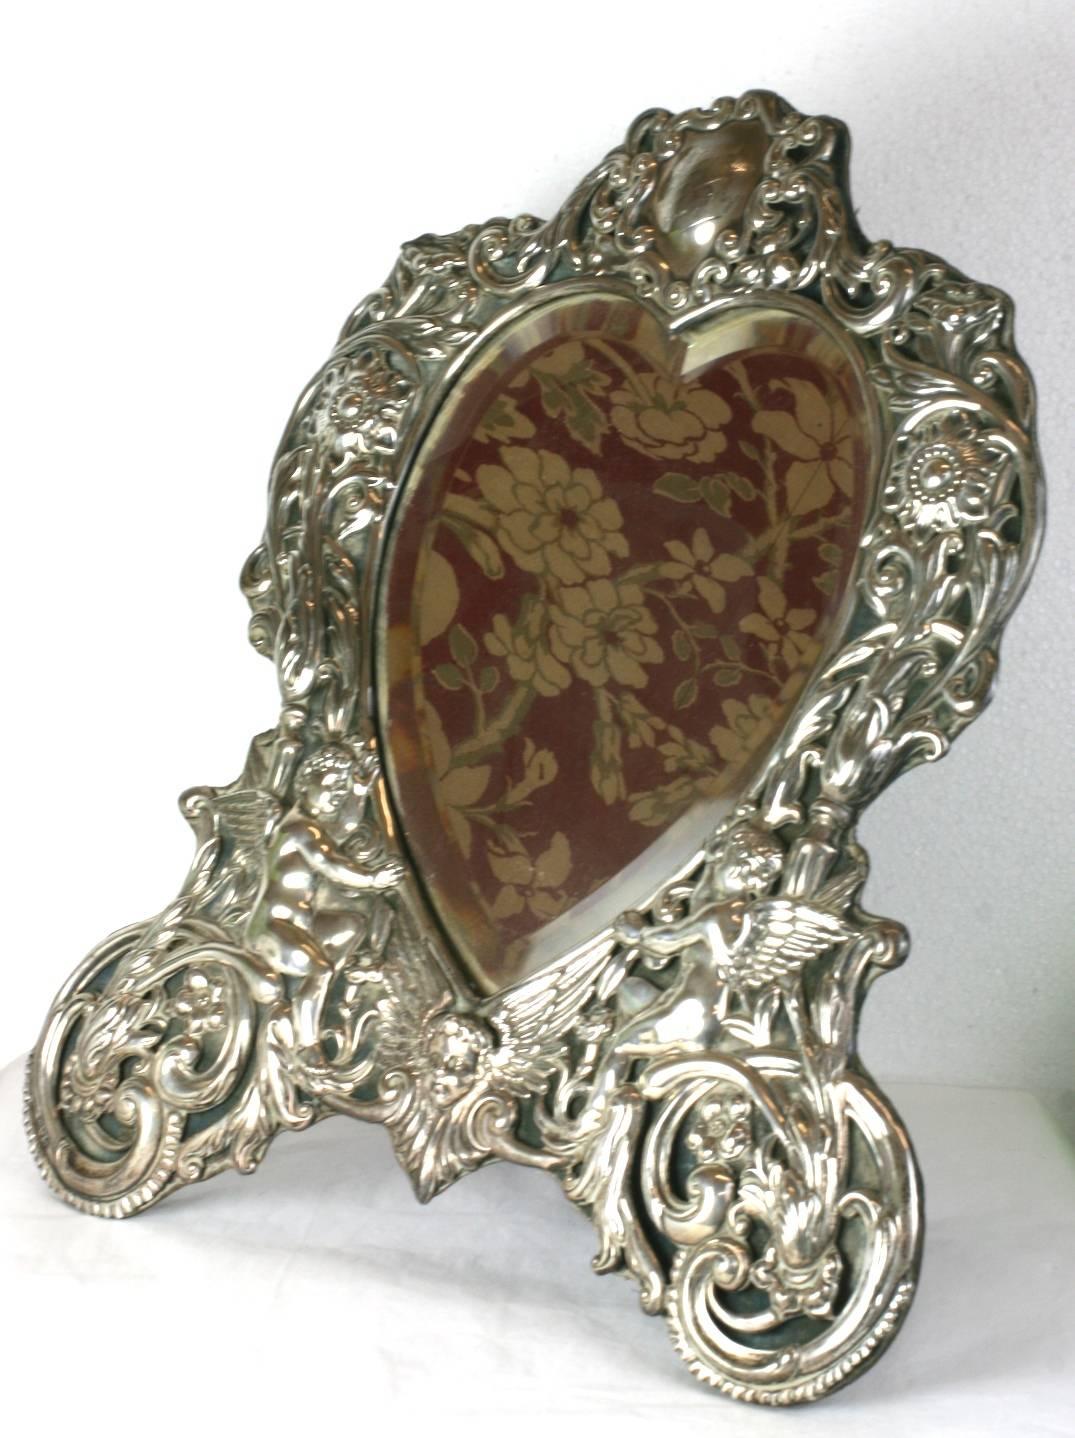 Elaborate and wonderful Victorian heart formed sterling dressing/vanity mirror, late 19th century English. Wonderfully high styled Victorian motifs with cherubs, sunflowers and elaborate scrollwork. The repousse sterling motif is backed on a velvet